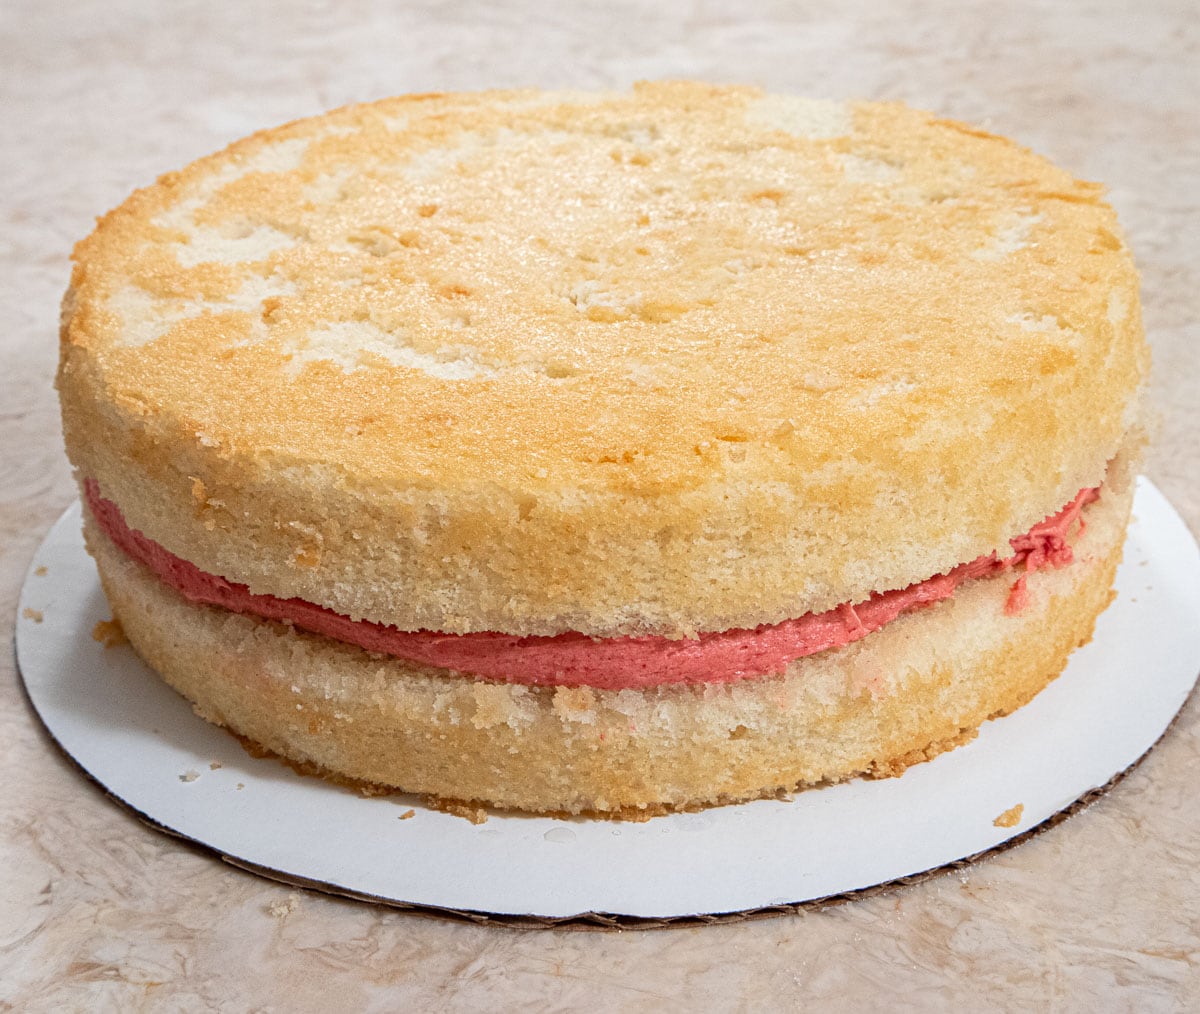 The top layer is placed, wash side down, on top of the strawberry filling.